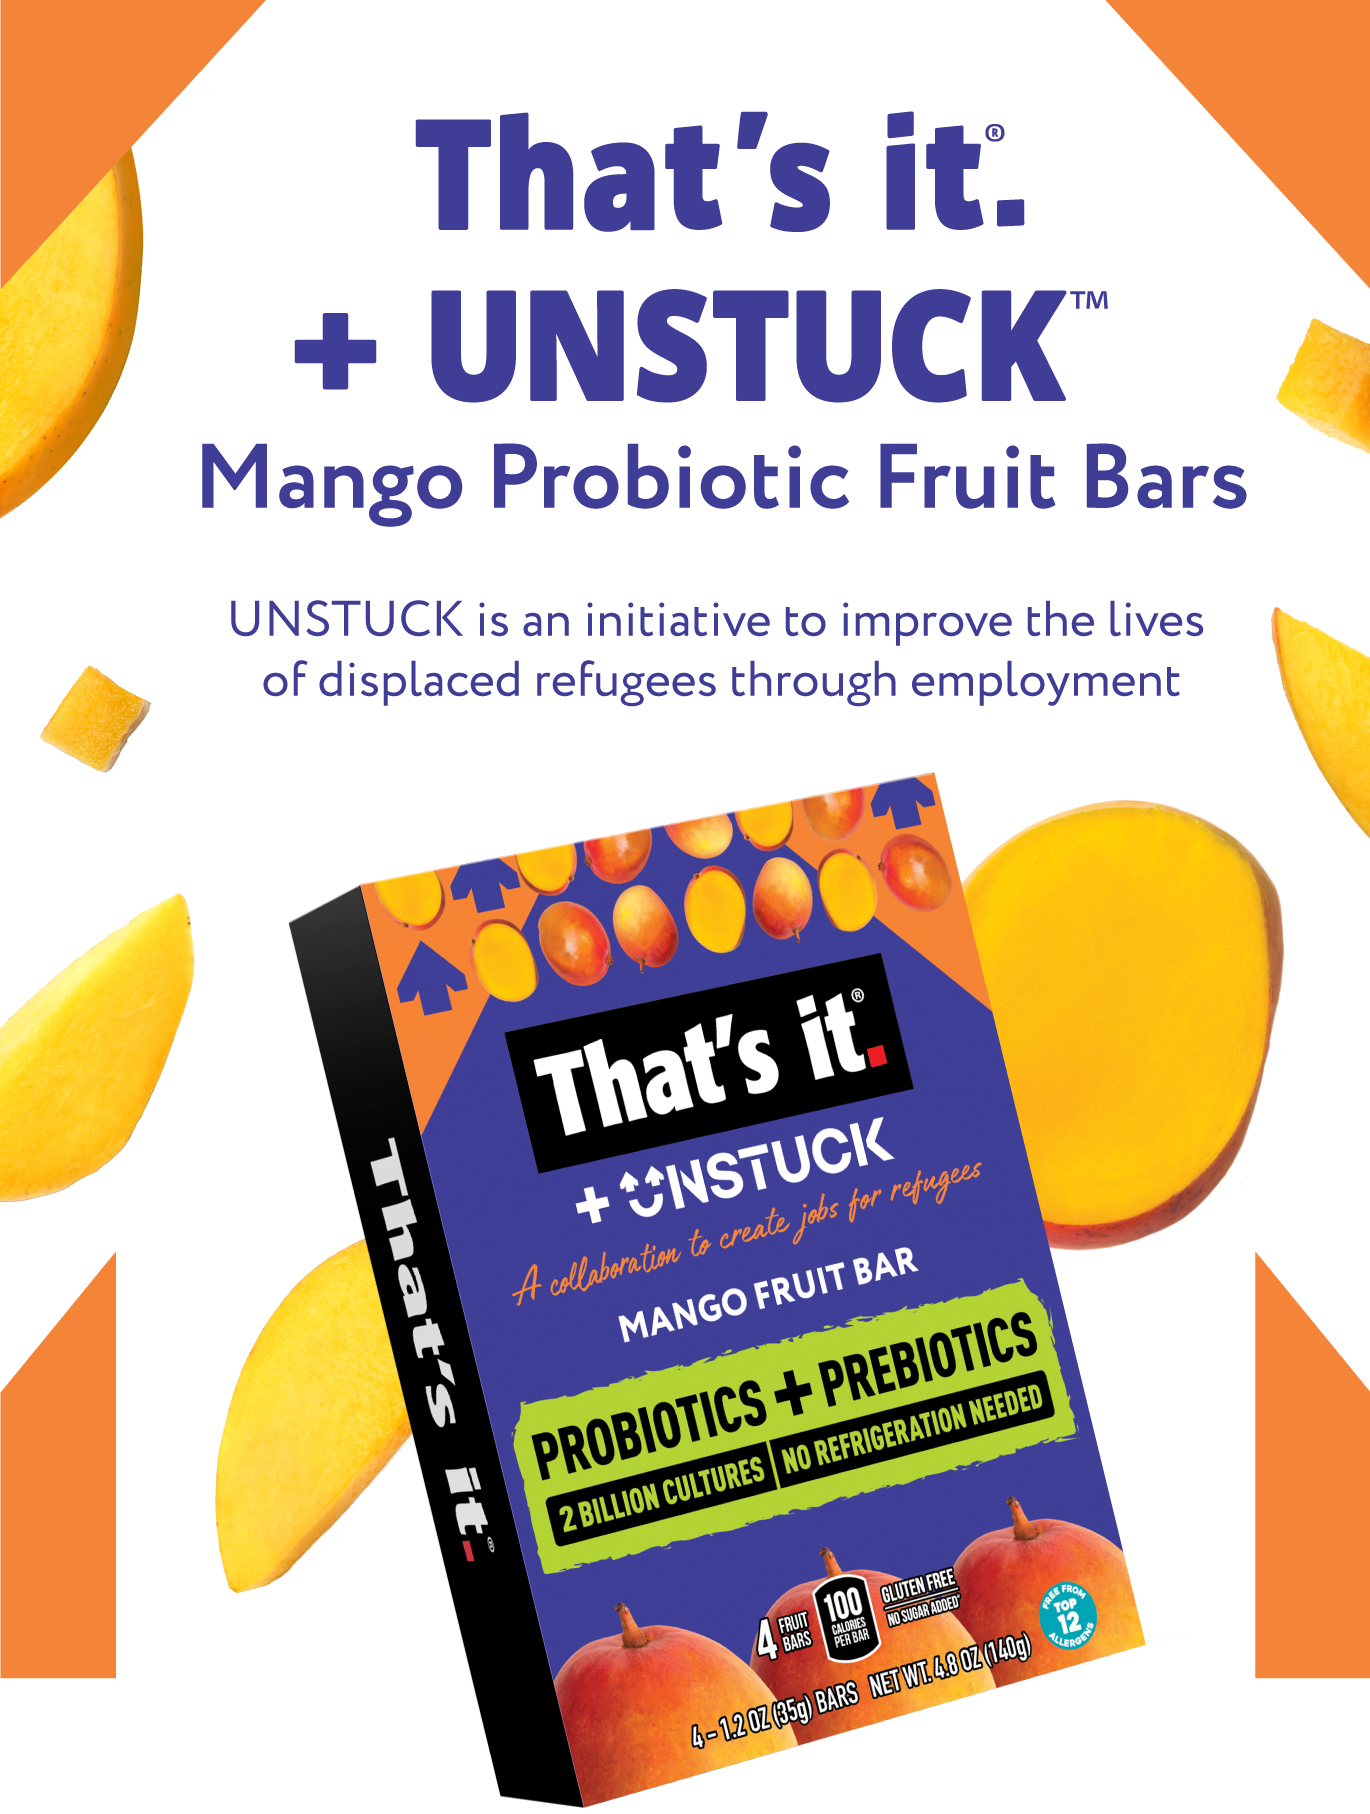 That's it. + Unstuck Mango Probiotic Fruit Bars. Unstuck is an initiative to improve the lives of displaced refugees through employment